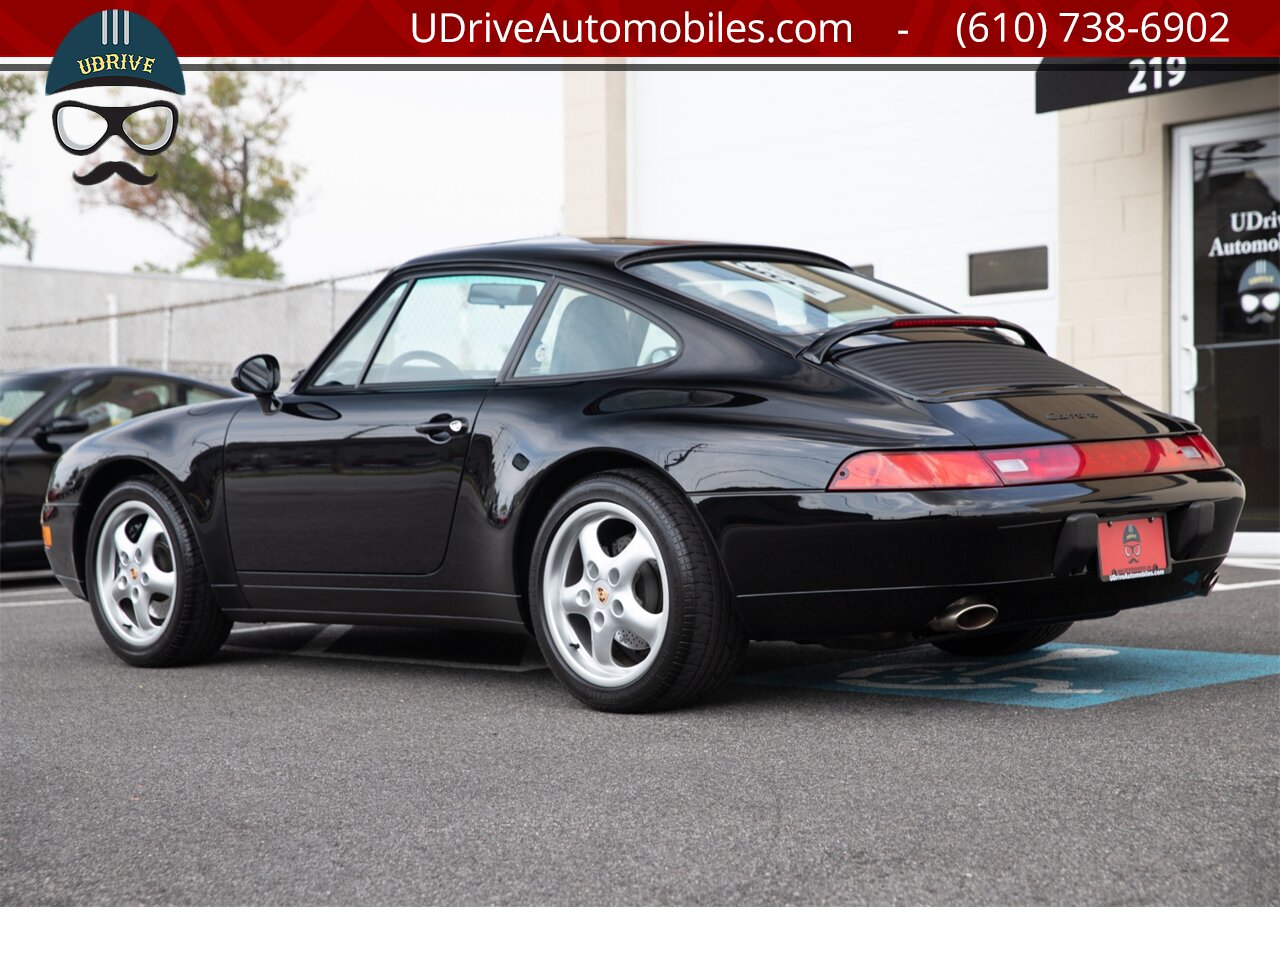 1995 Porsche 911 993 Carrera 6 Speed 16k Miles Service History  Black over Black Spectacular Stock Example 1 Owner Clean Carfax - Photo 21 - West Chester, PA 19382